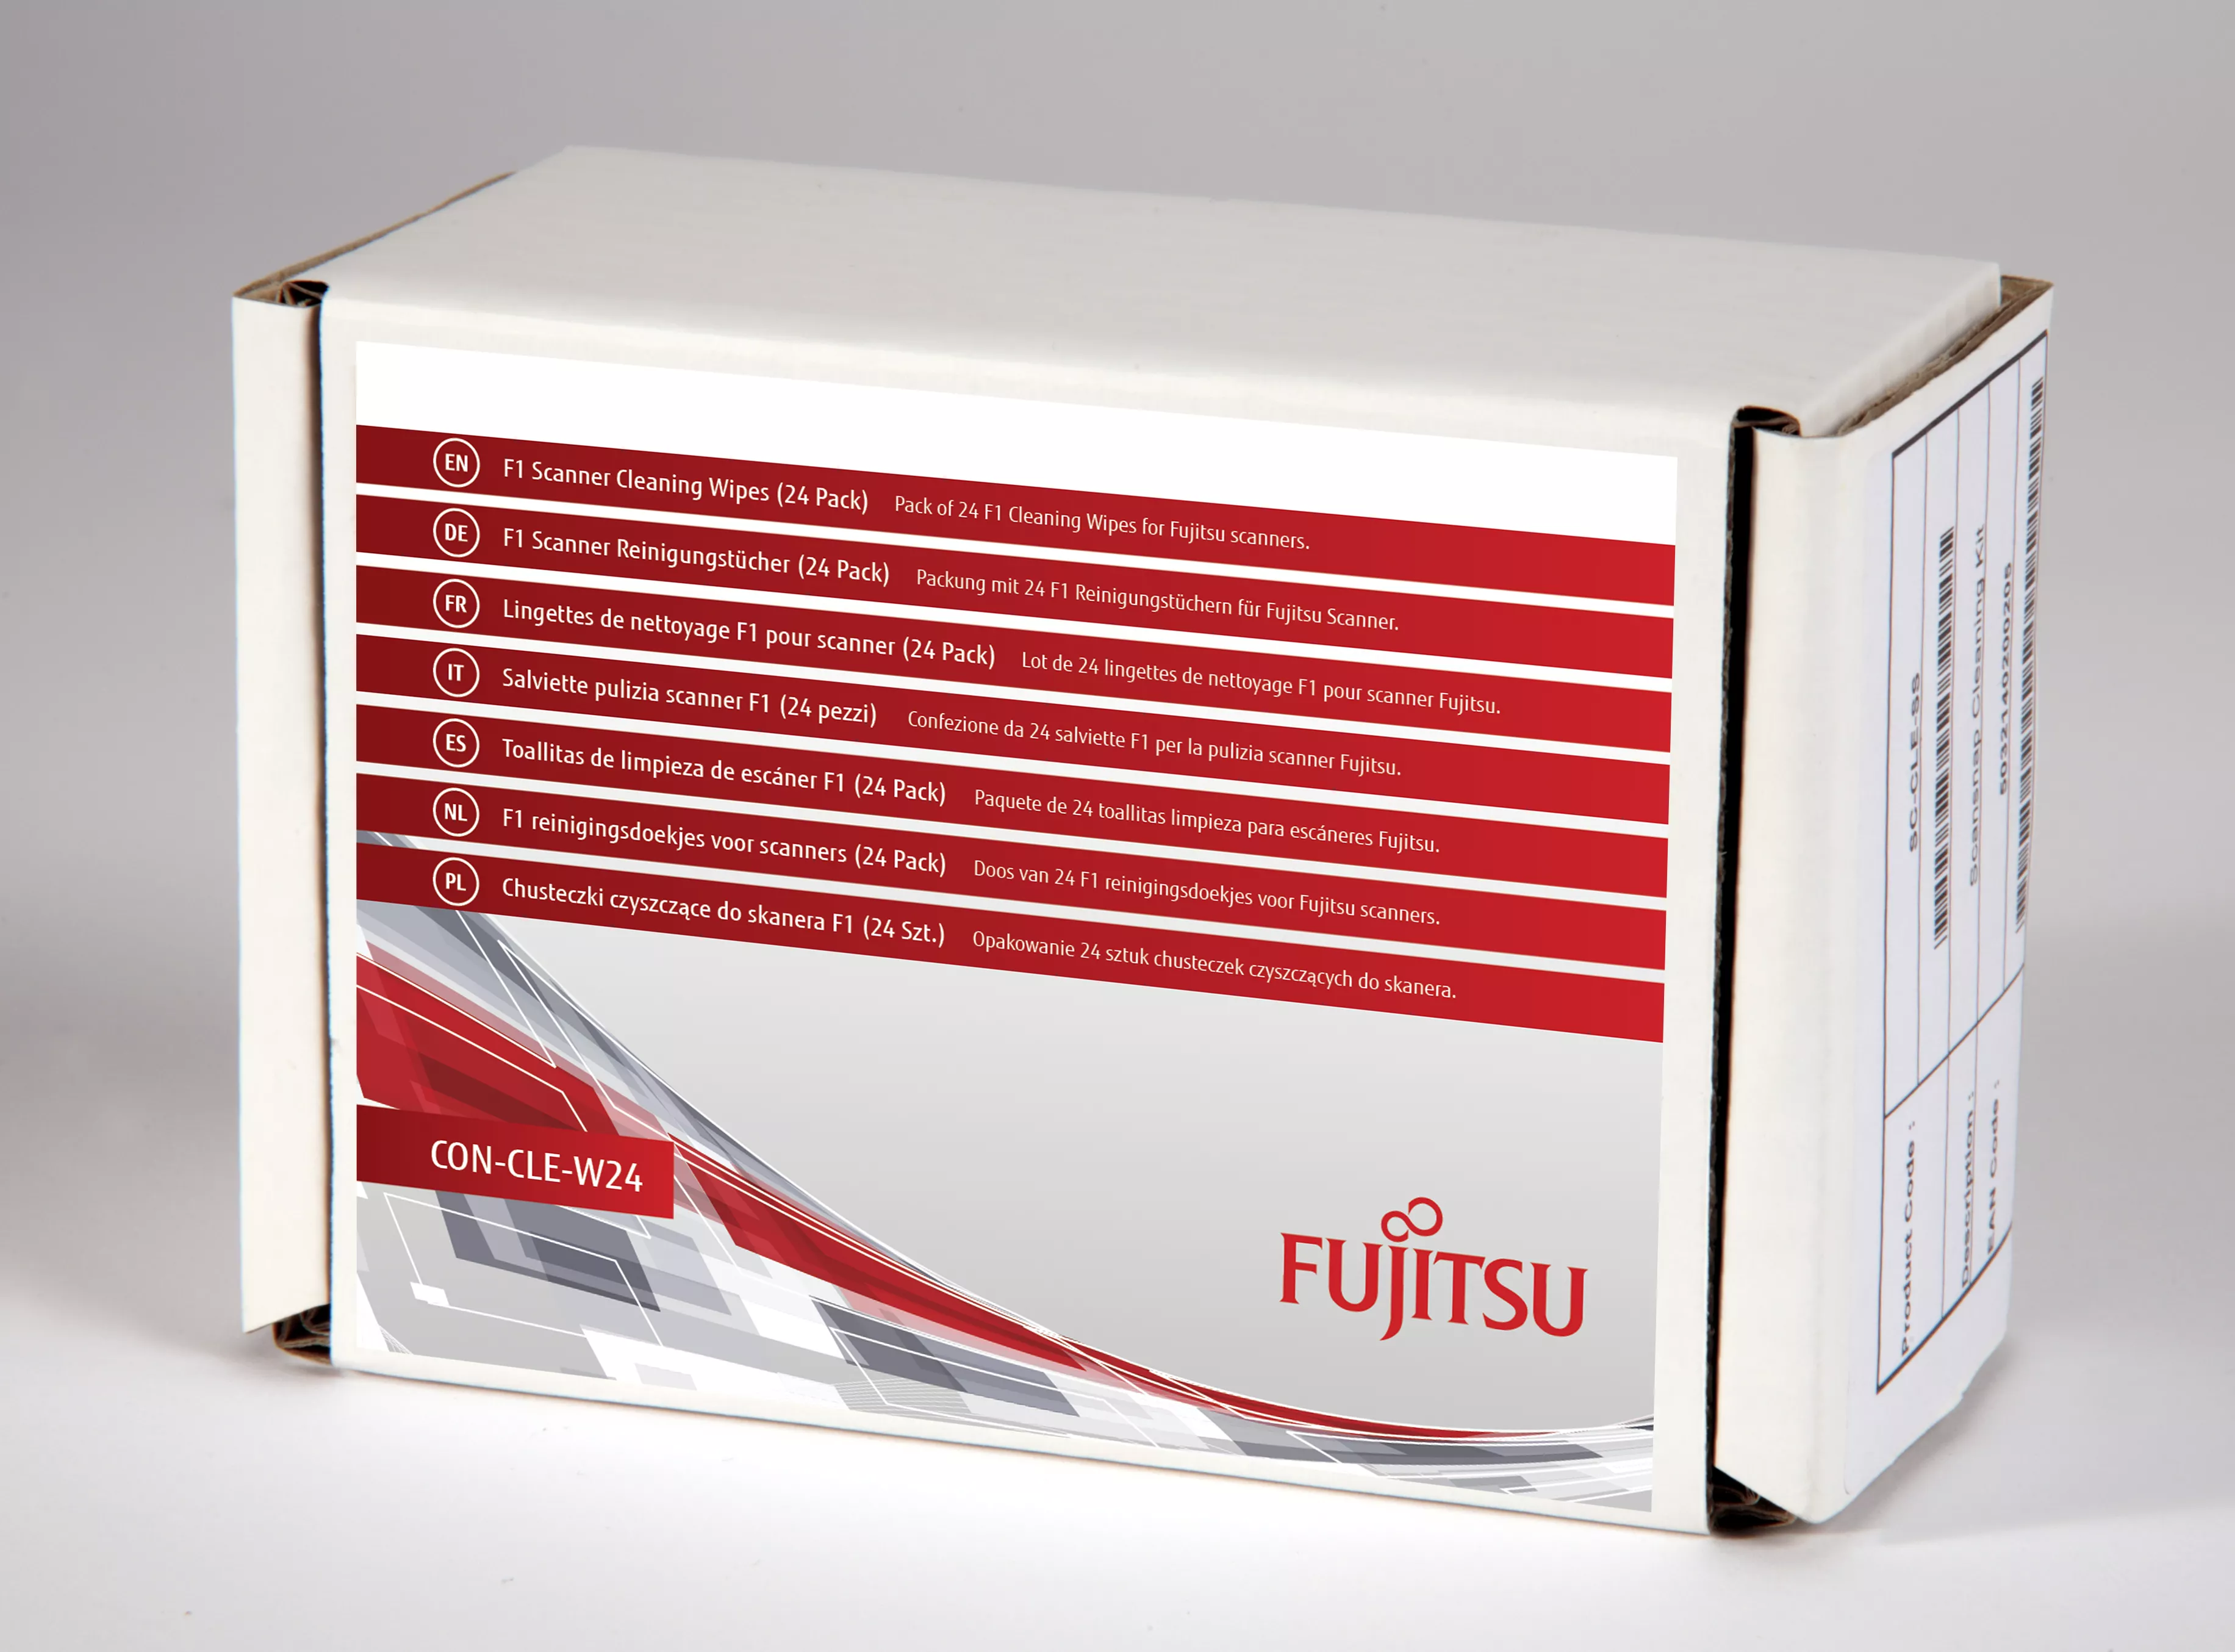 Achat Autres consommables FUJITSU Pack of 24 F1 Cleaning Wipes for Fujitsu scanners sur hello RSE